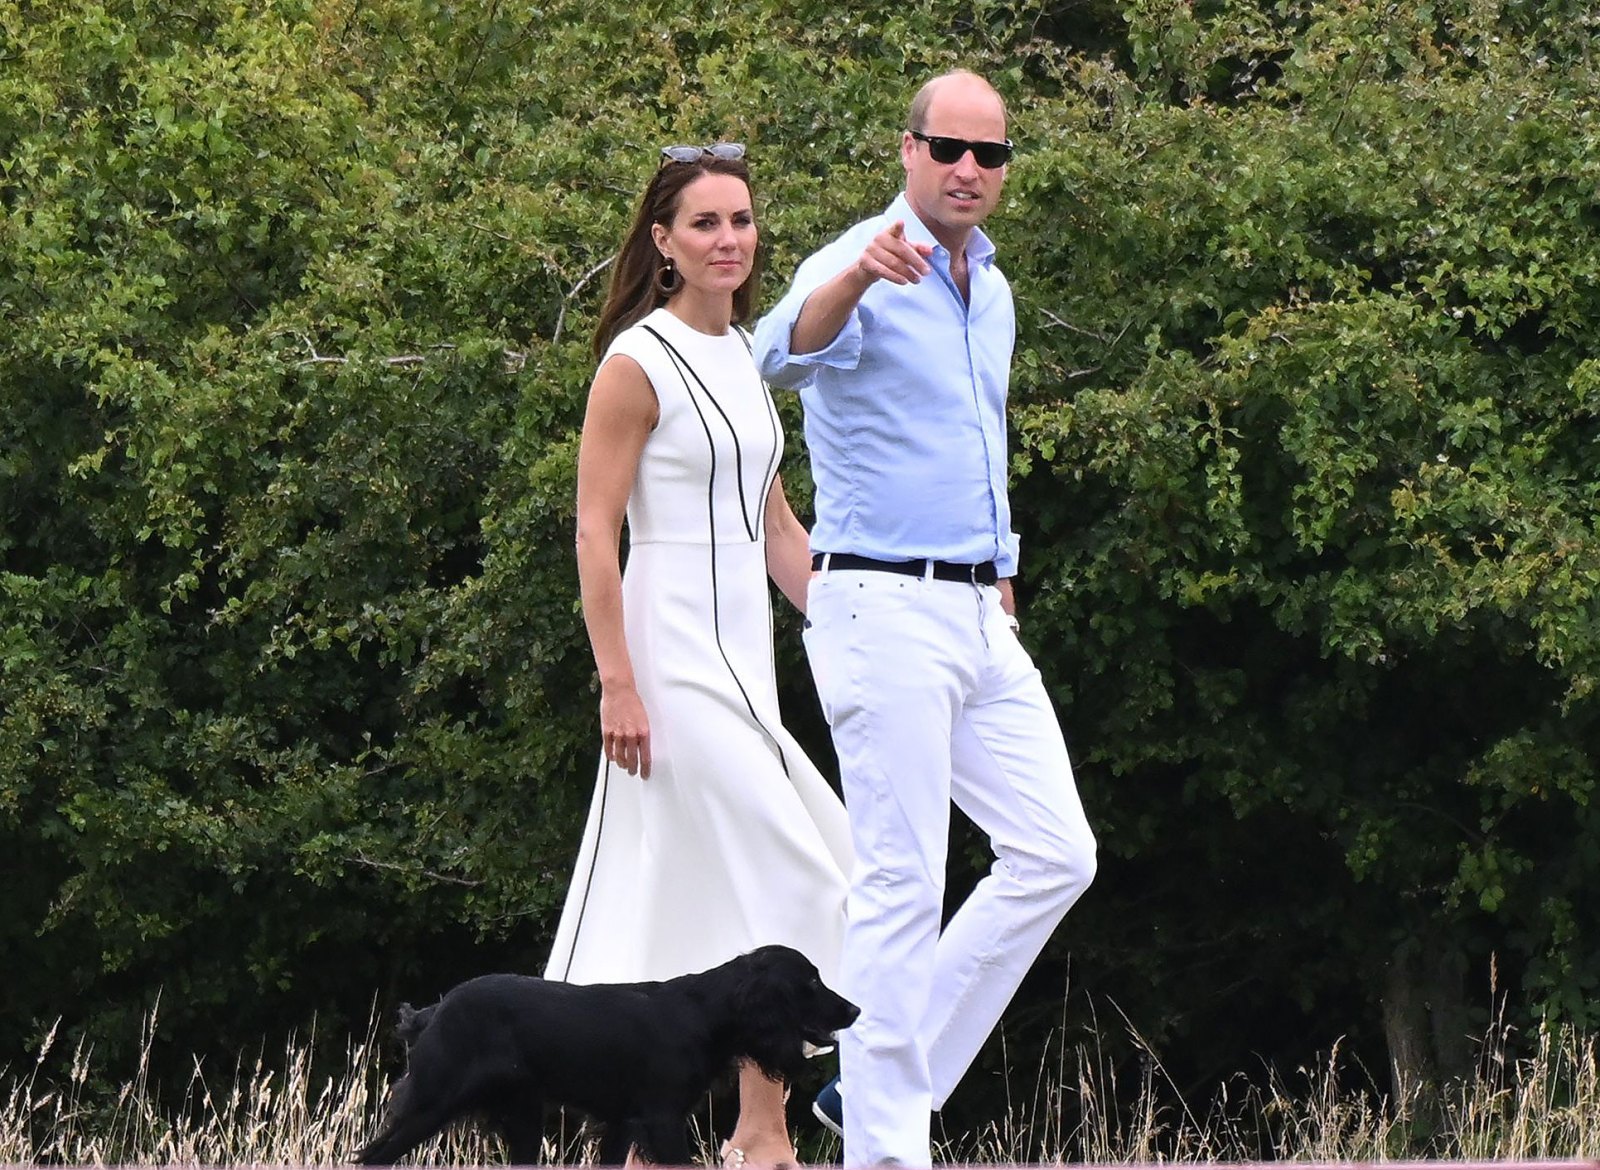 Prince William and Duchess Kate Bring Their Dog Orla to Charity Polo Match